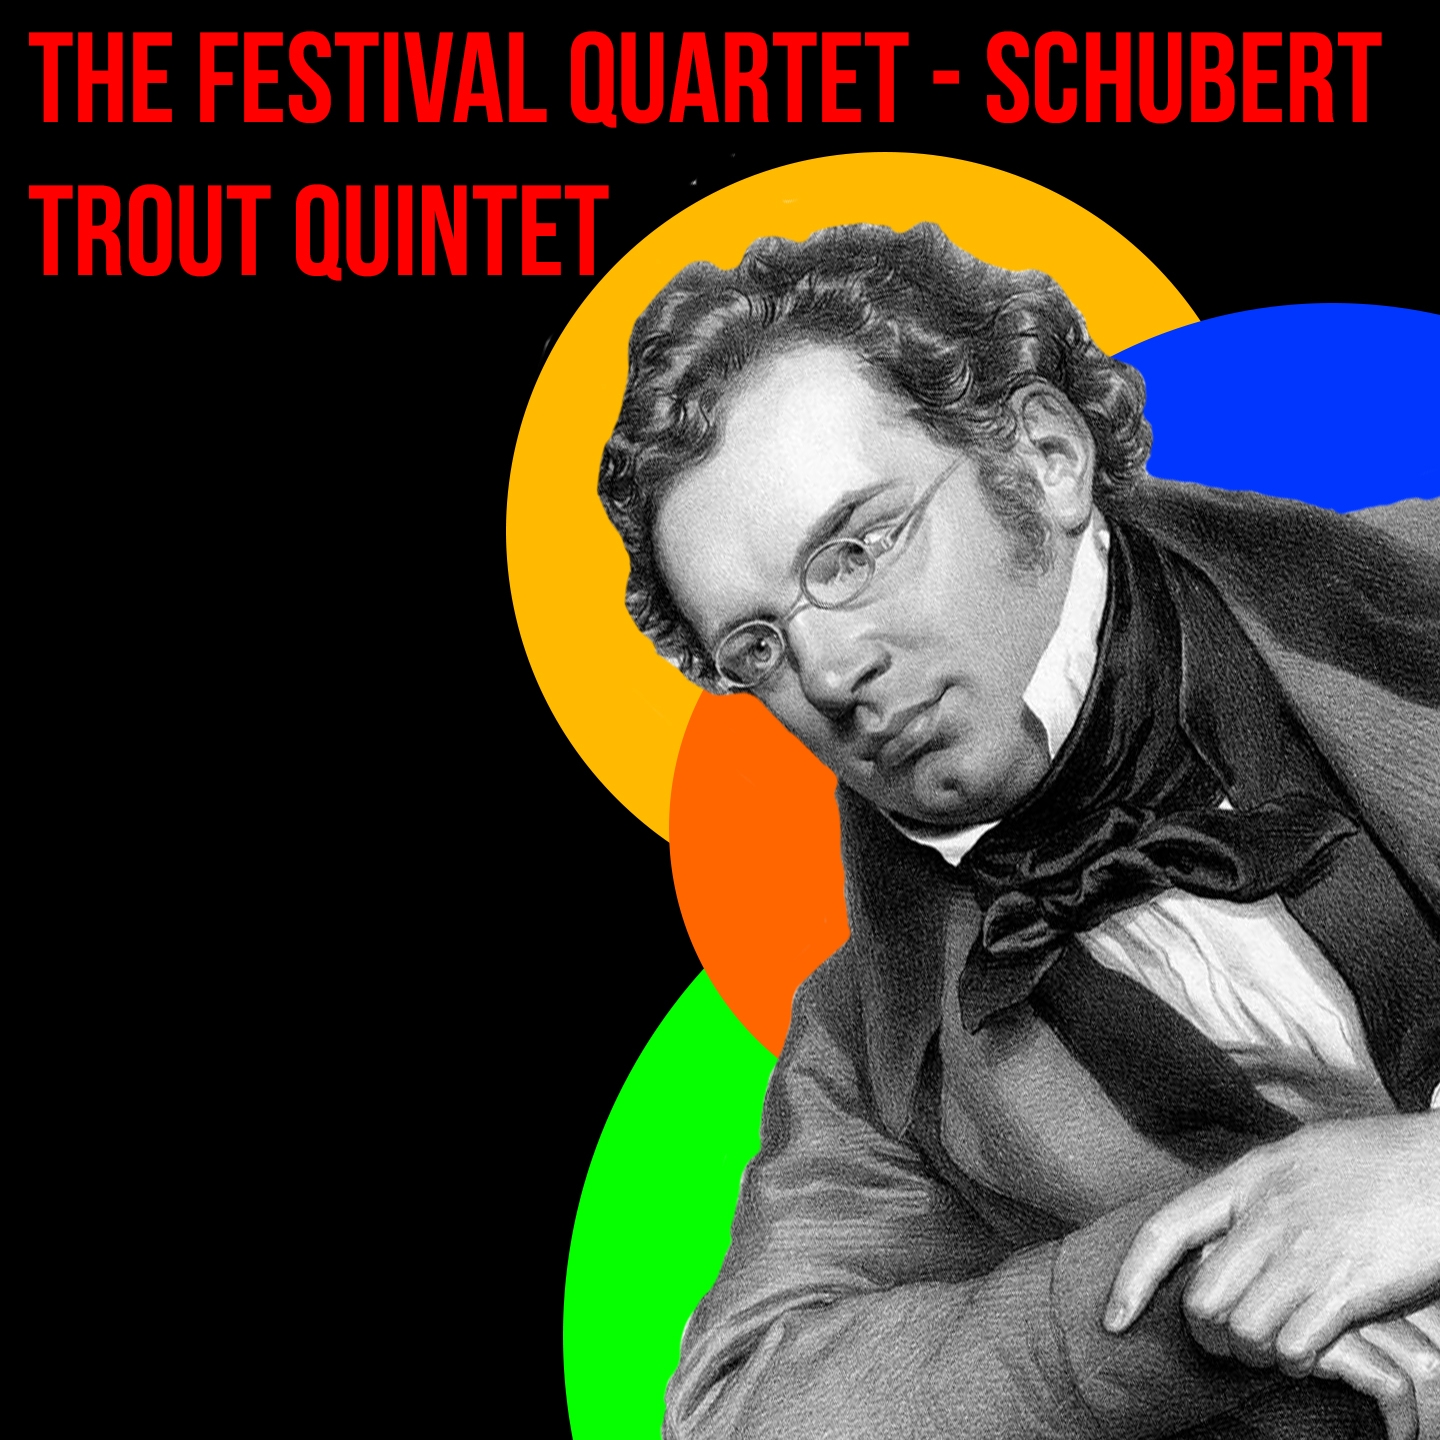 Piano Quintet in A Major, Op. 114, D. 667 "The Trout" / I. Allegro vivace